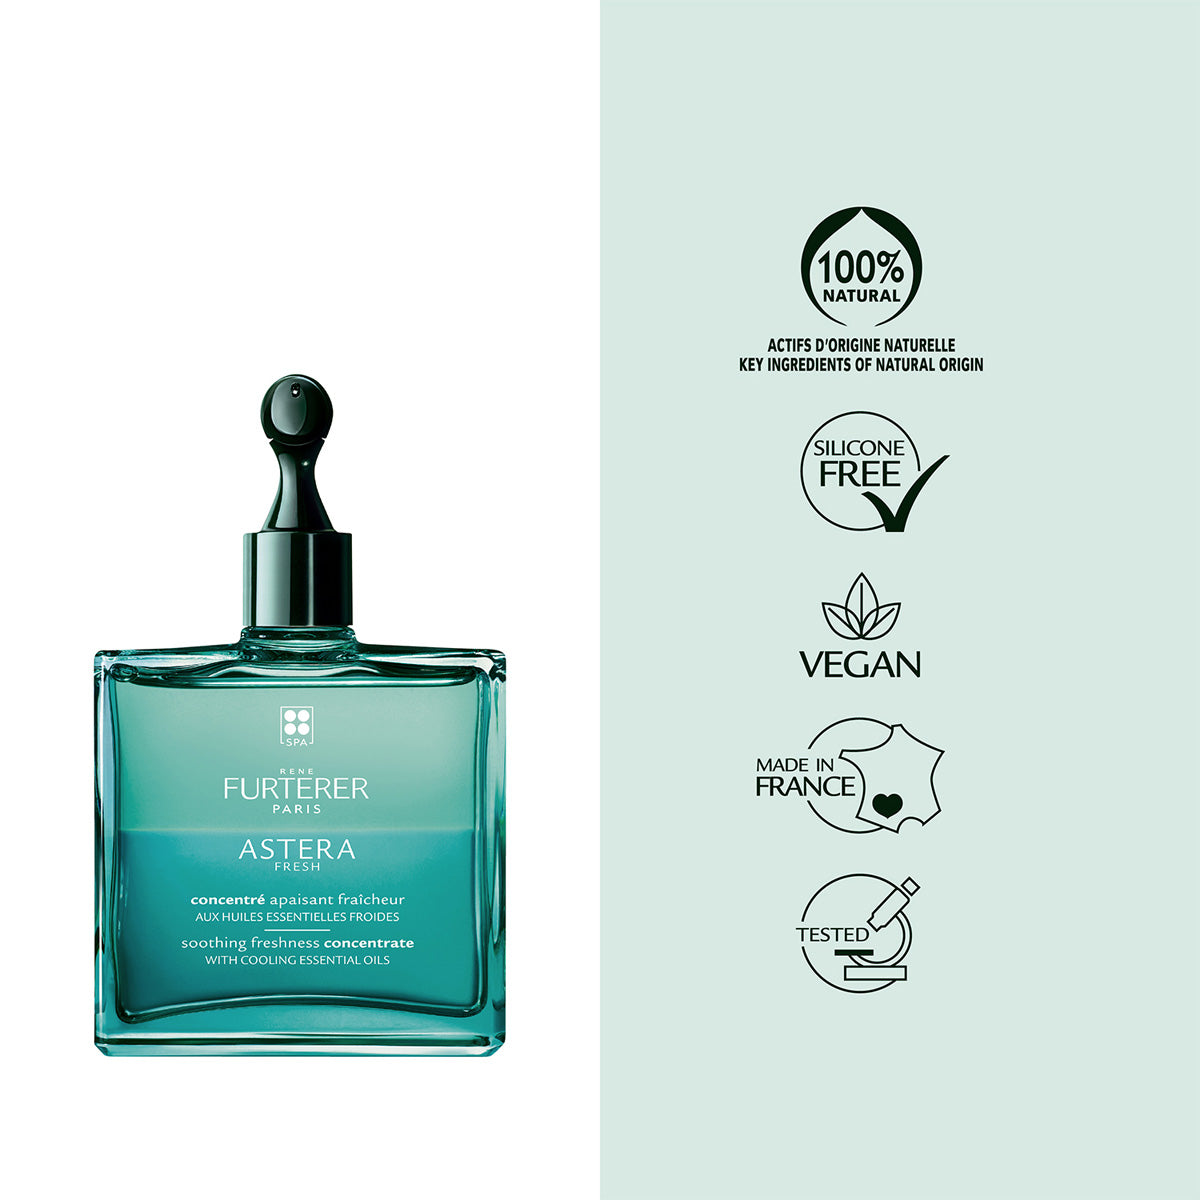 Rene Furtere|Astera Fresh Soothing Freshness Concentrate|50ml